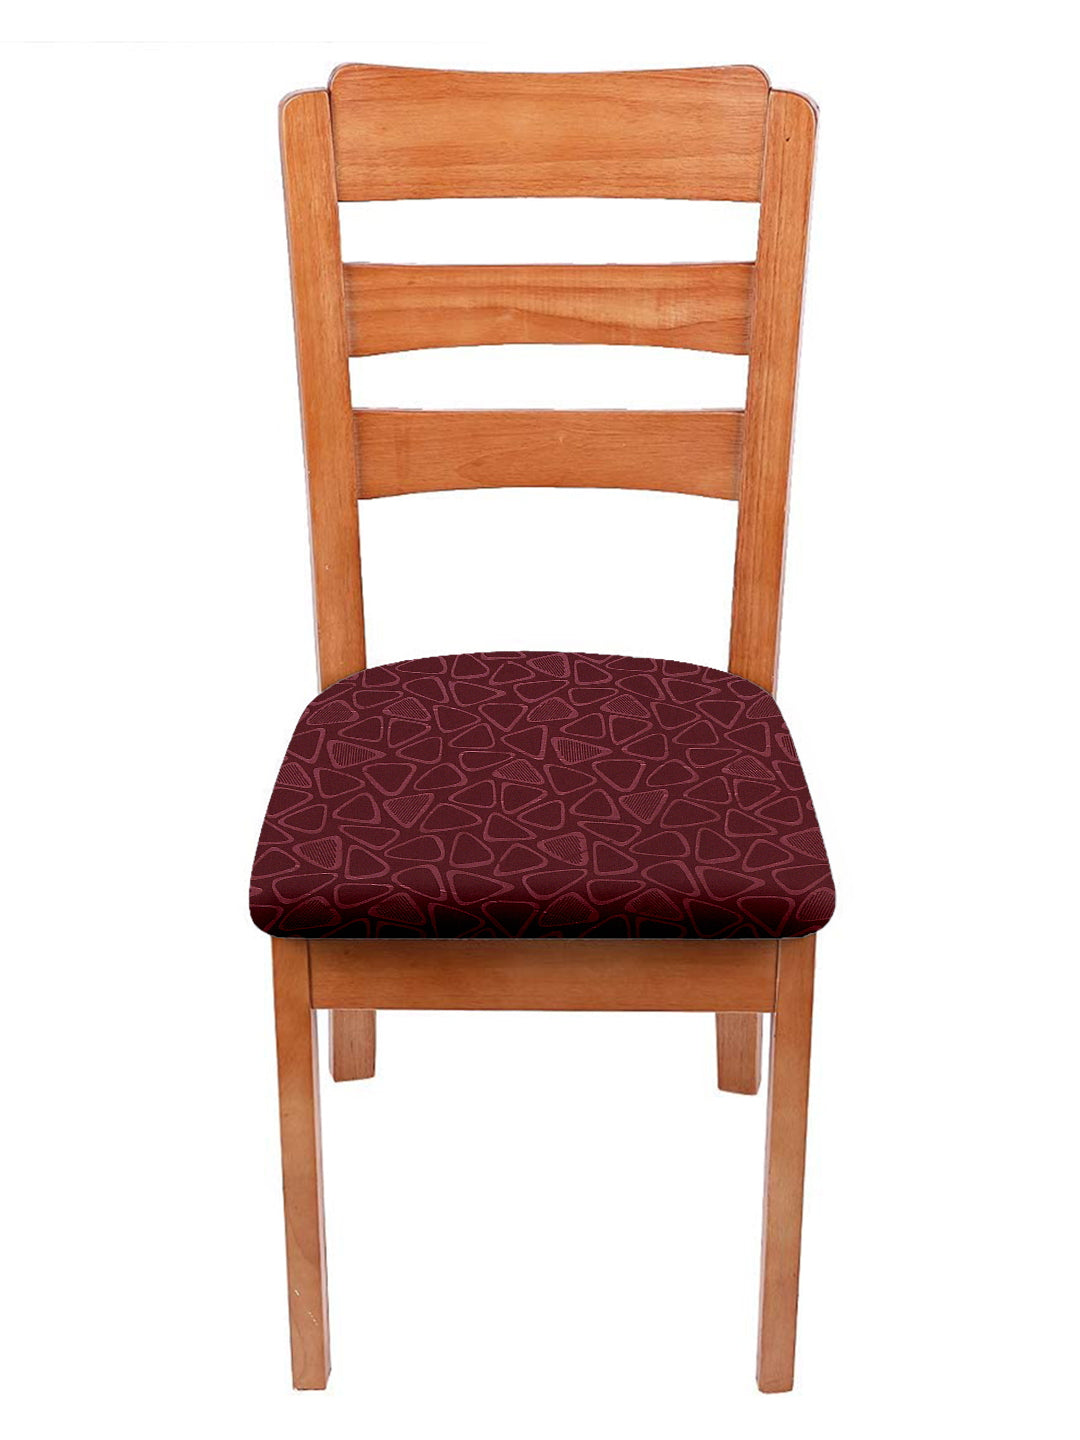 Stretchable Digital Printed Non Slip Chair Pad Cover Pack of 1- Maroon